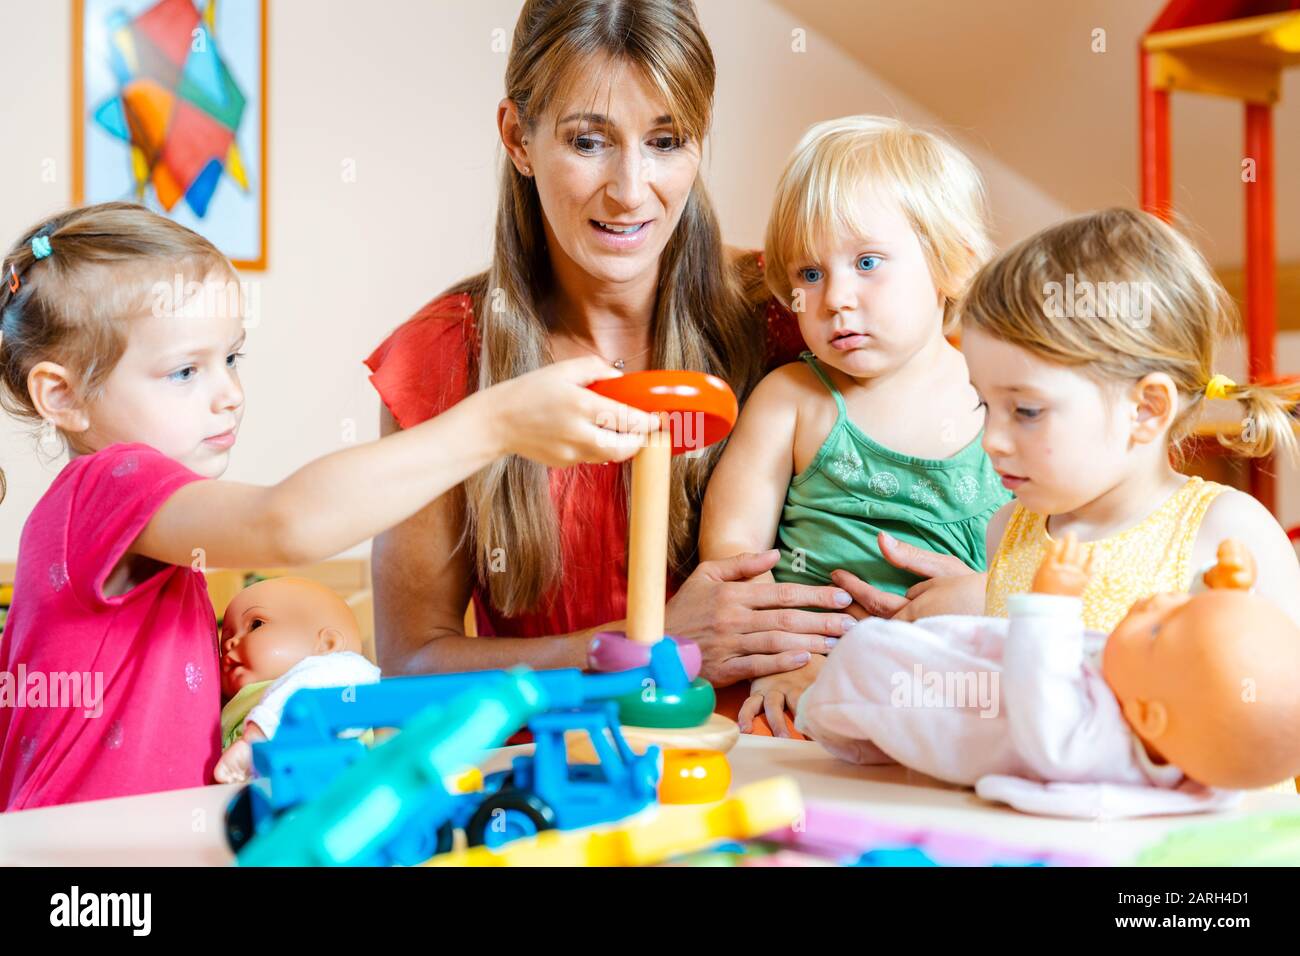 Children in nursery school learning and playing Stock Photo